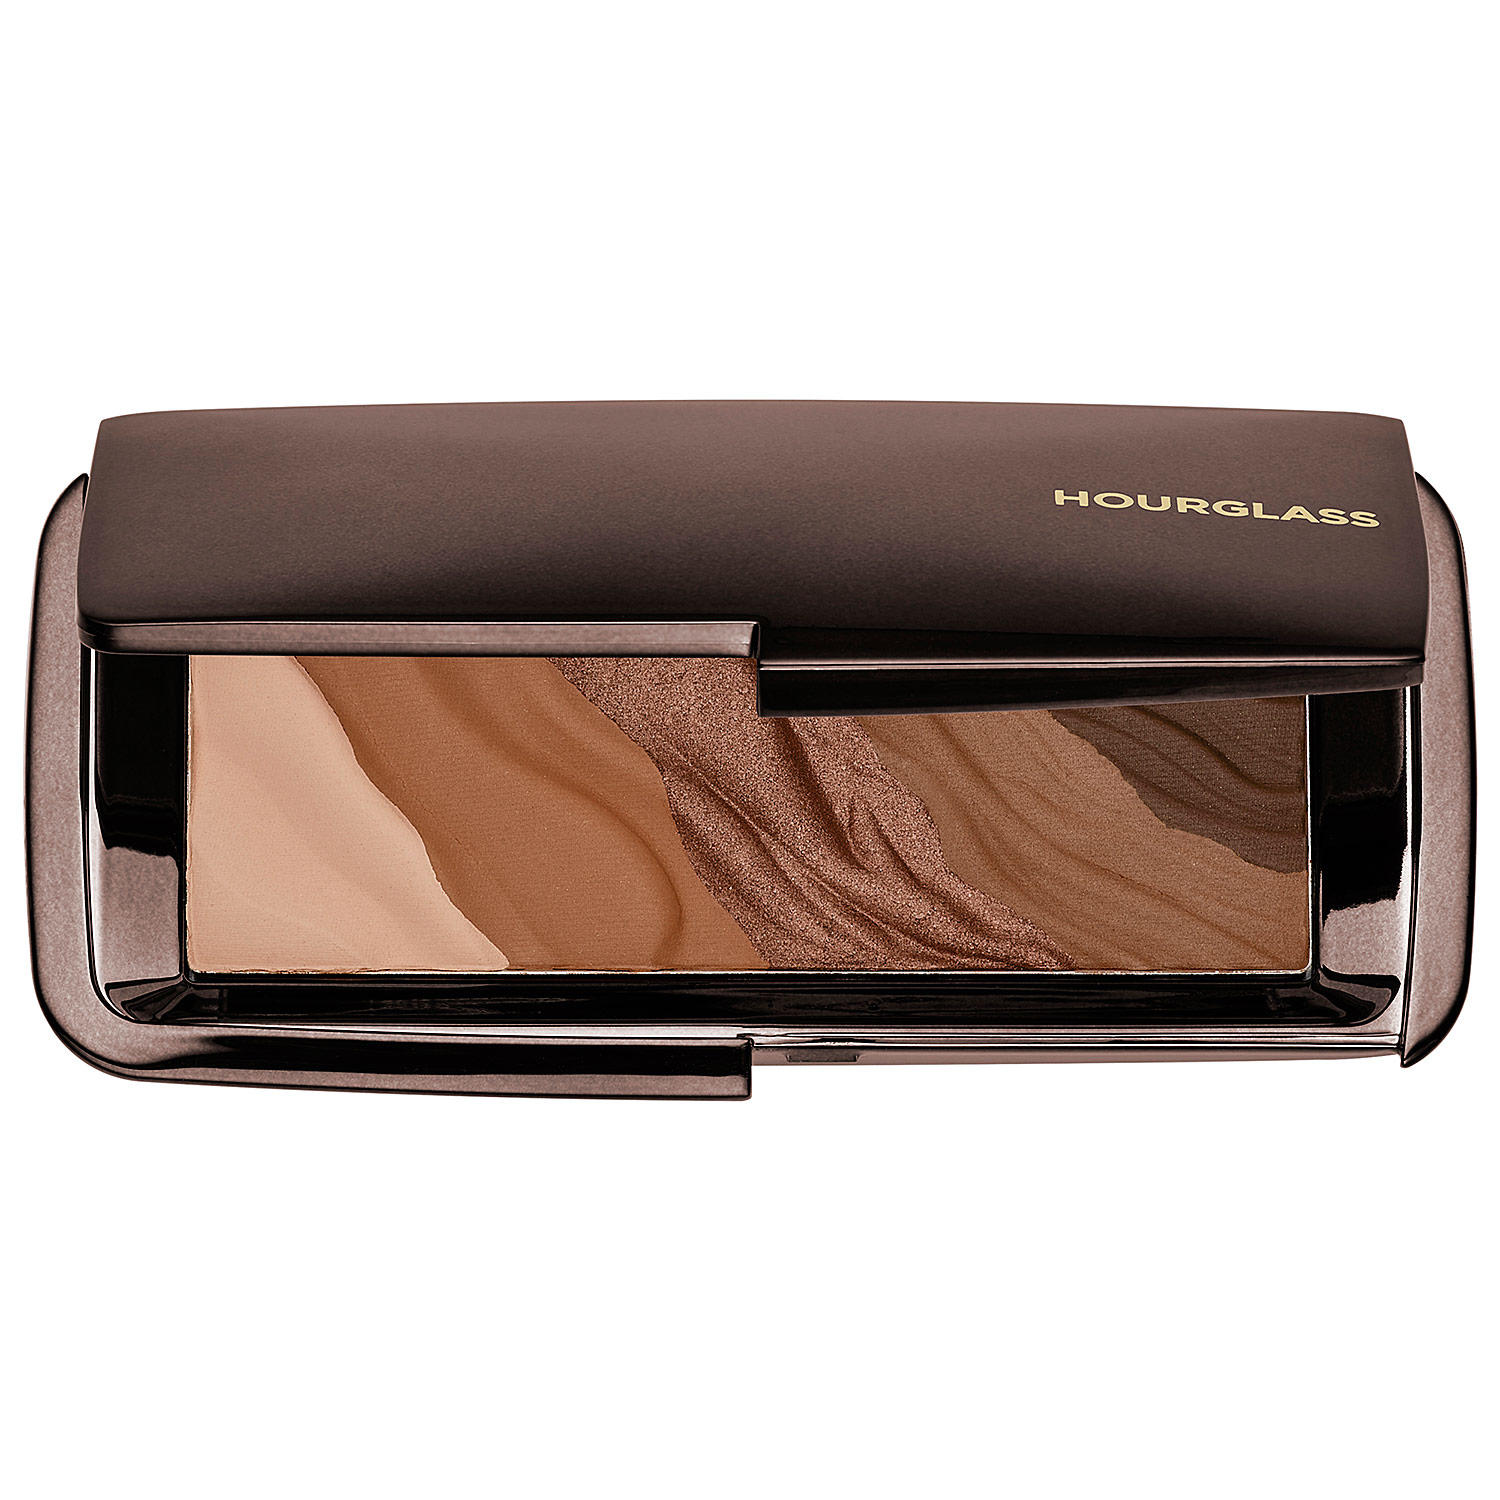 Hourglass The Modernist Eyeshadow Palette Infinity